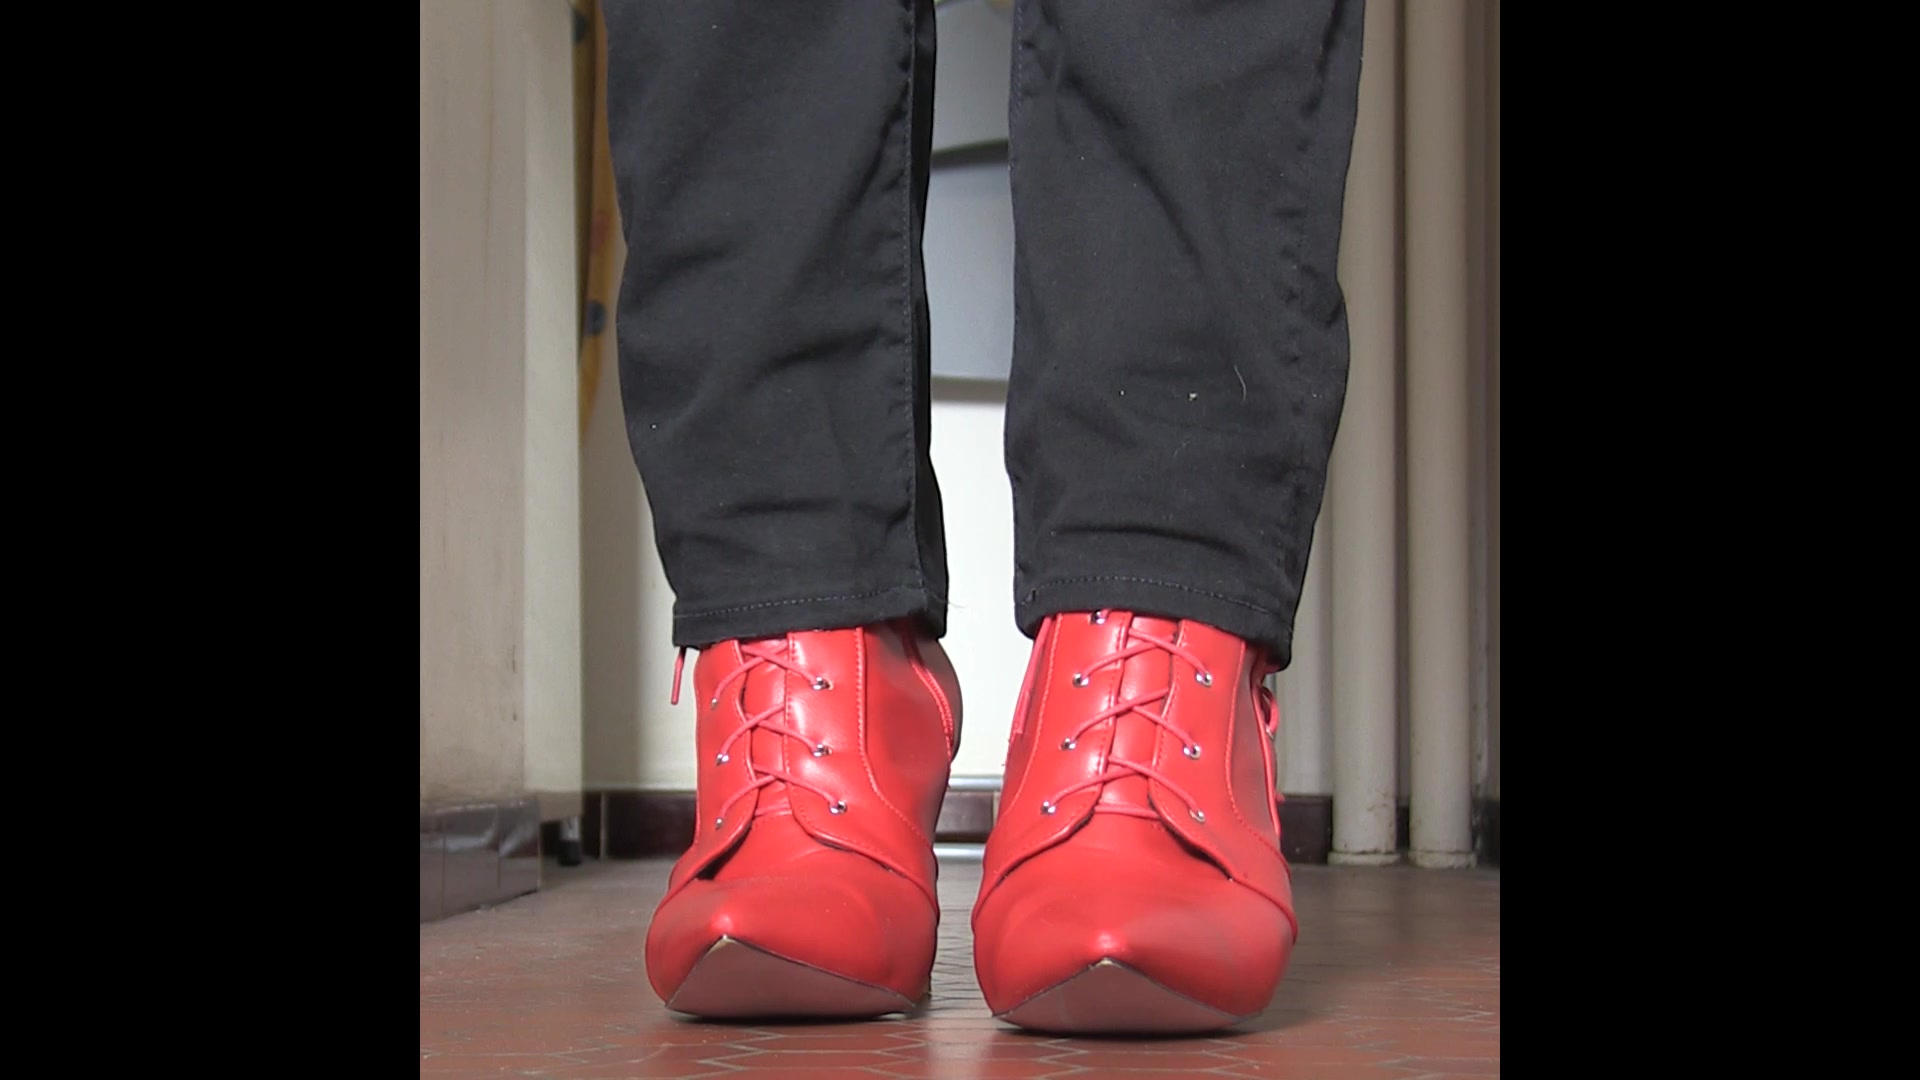 2018-06-10 Red Boots